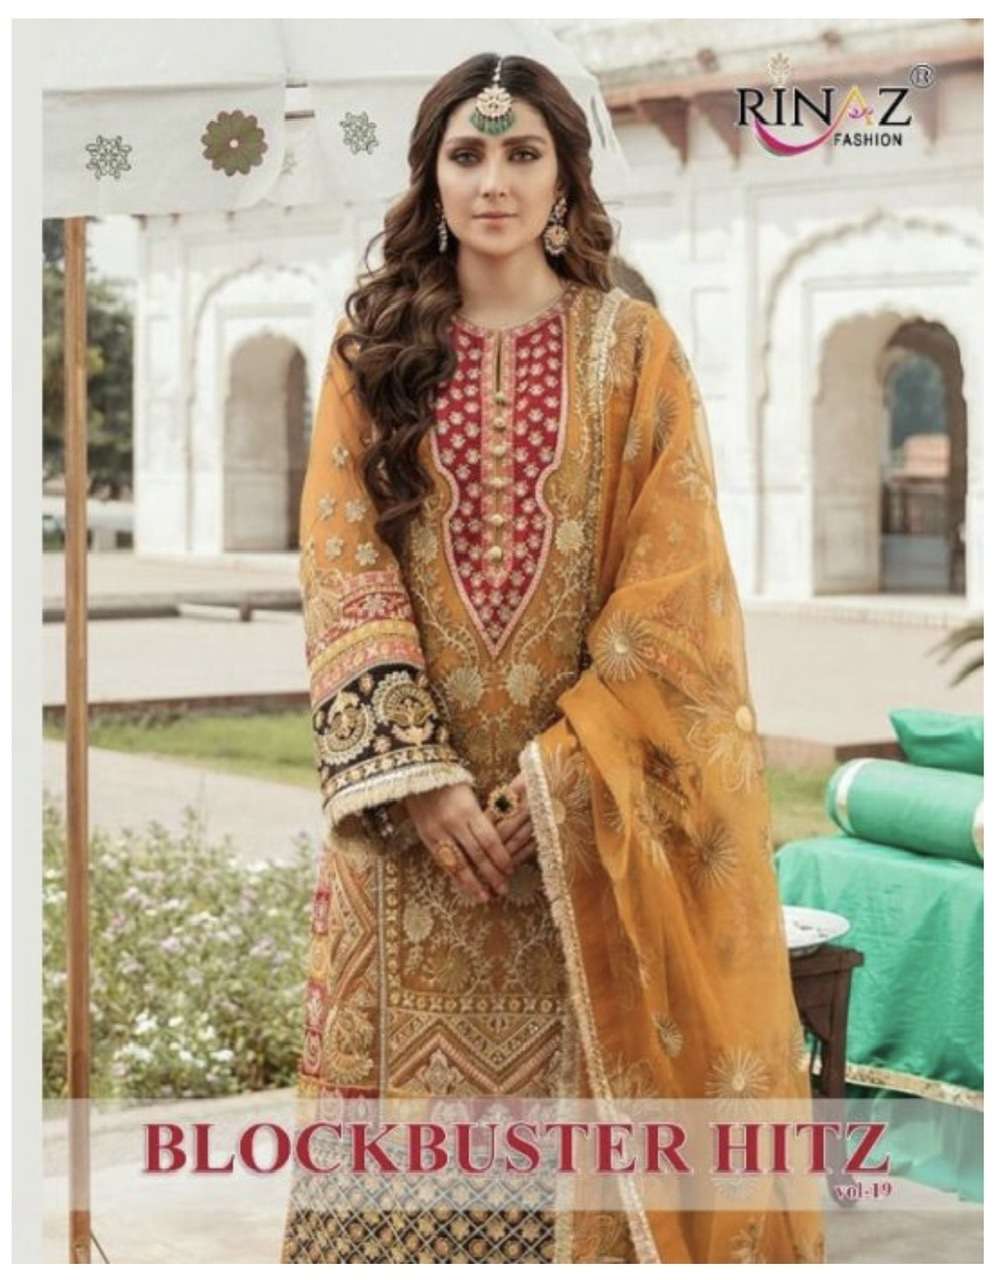 Rinaz fashion blockbuster hitz vol 19 faux georgette with embroidery work pakistani dress material at wholesale Rate 